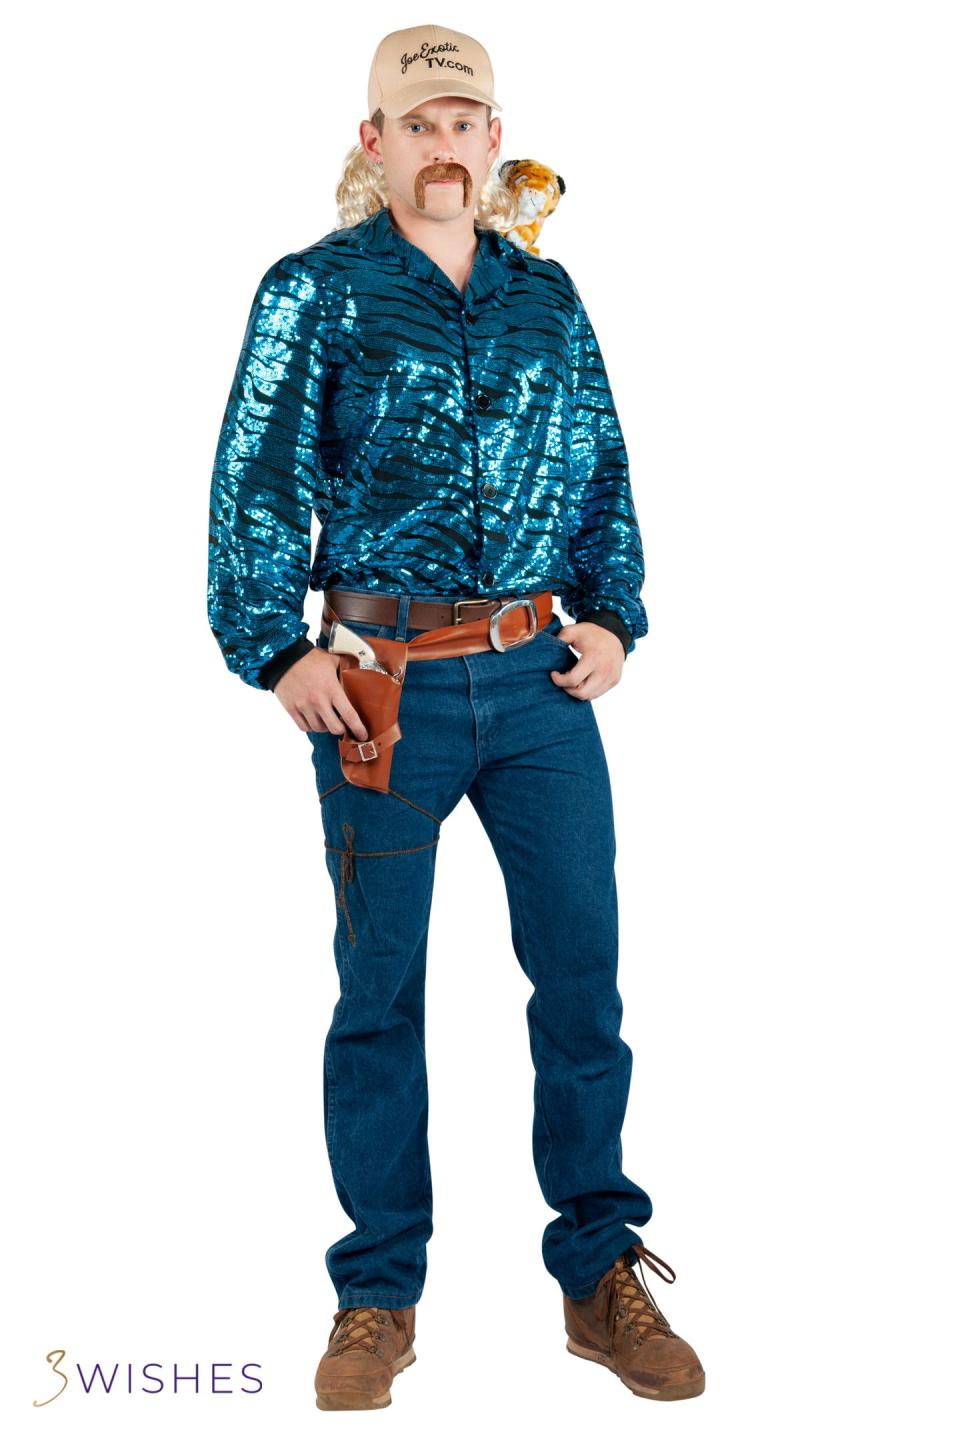 The "Joe Exotic Costume" from 3Wishes.com.